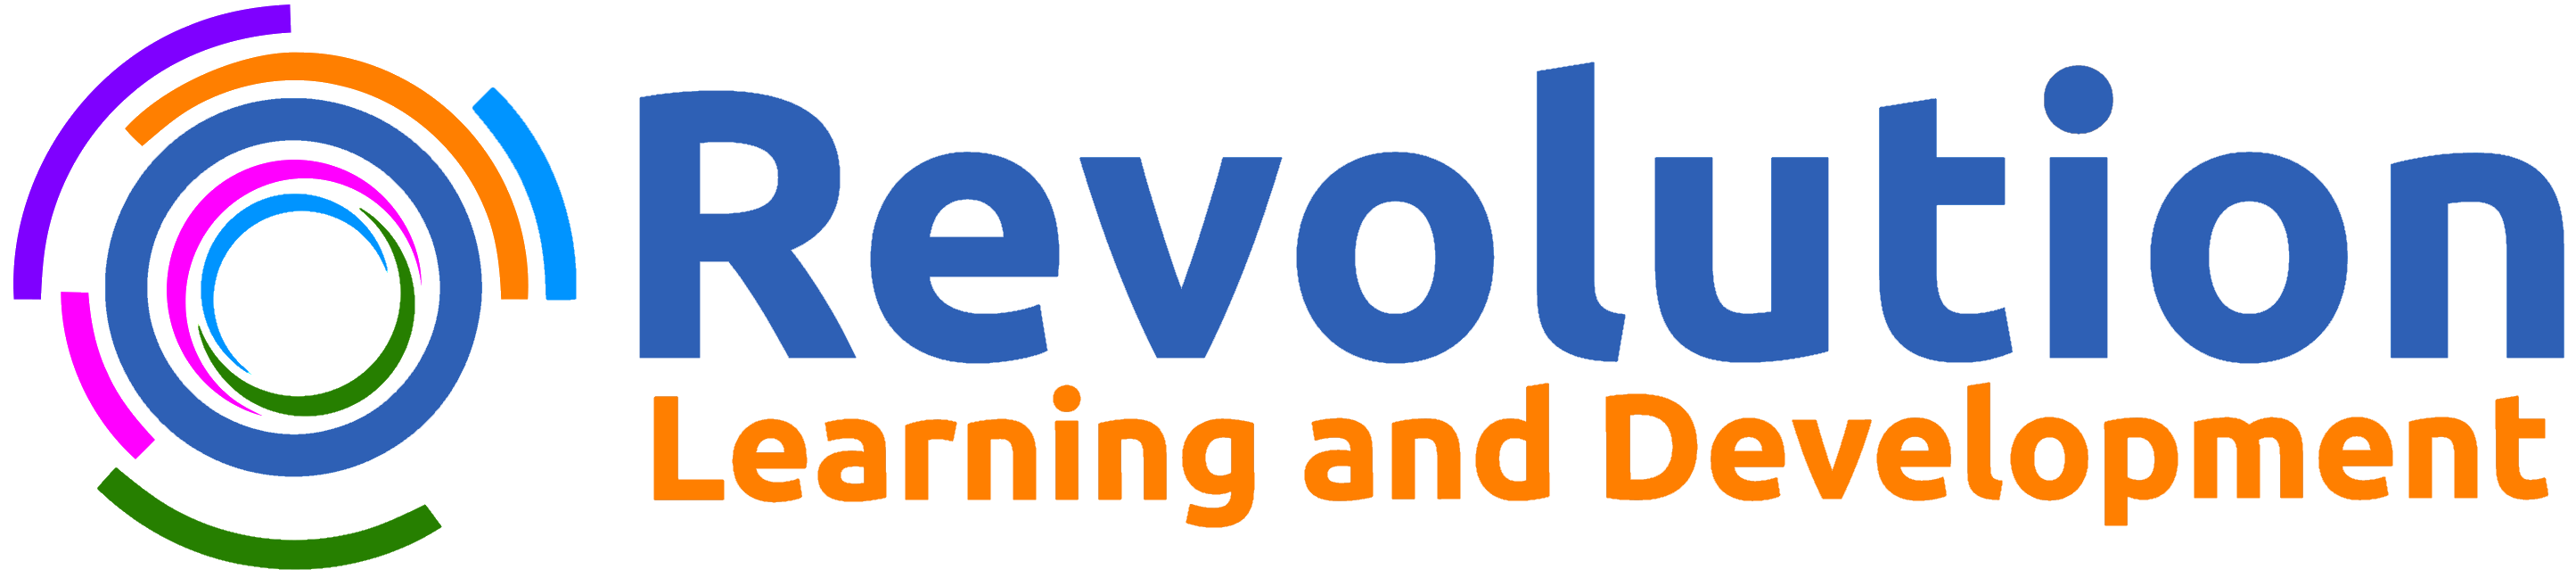 Revolution Learning and Development – Norway